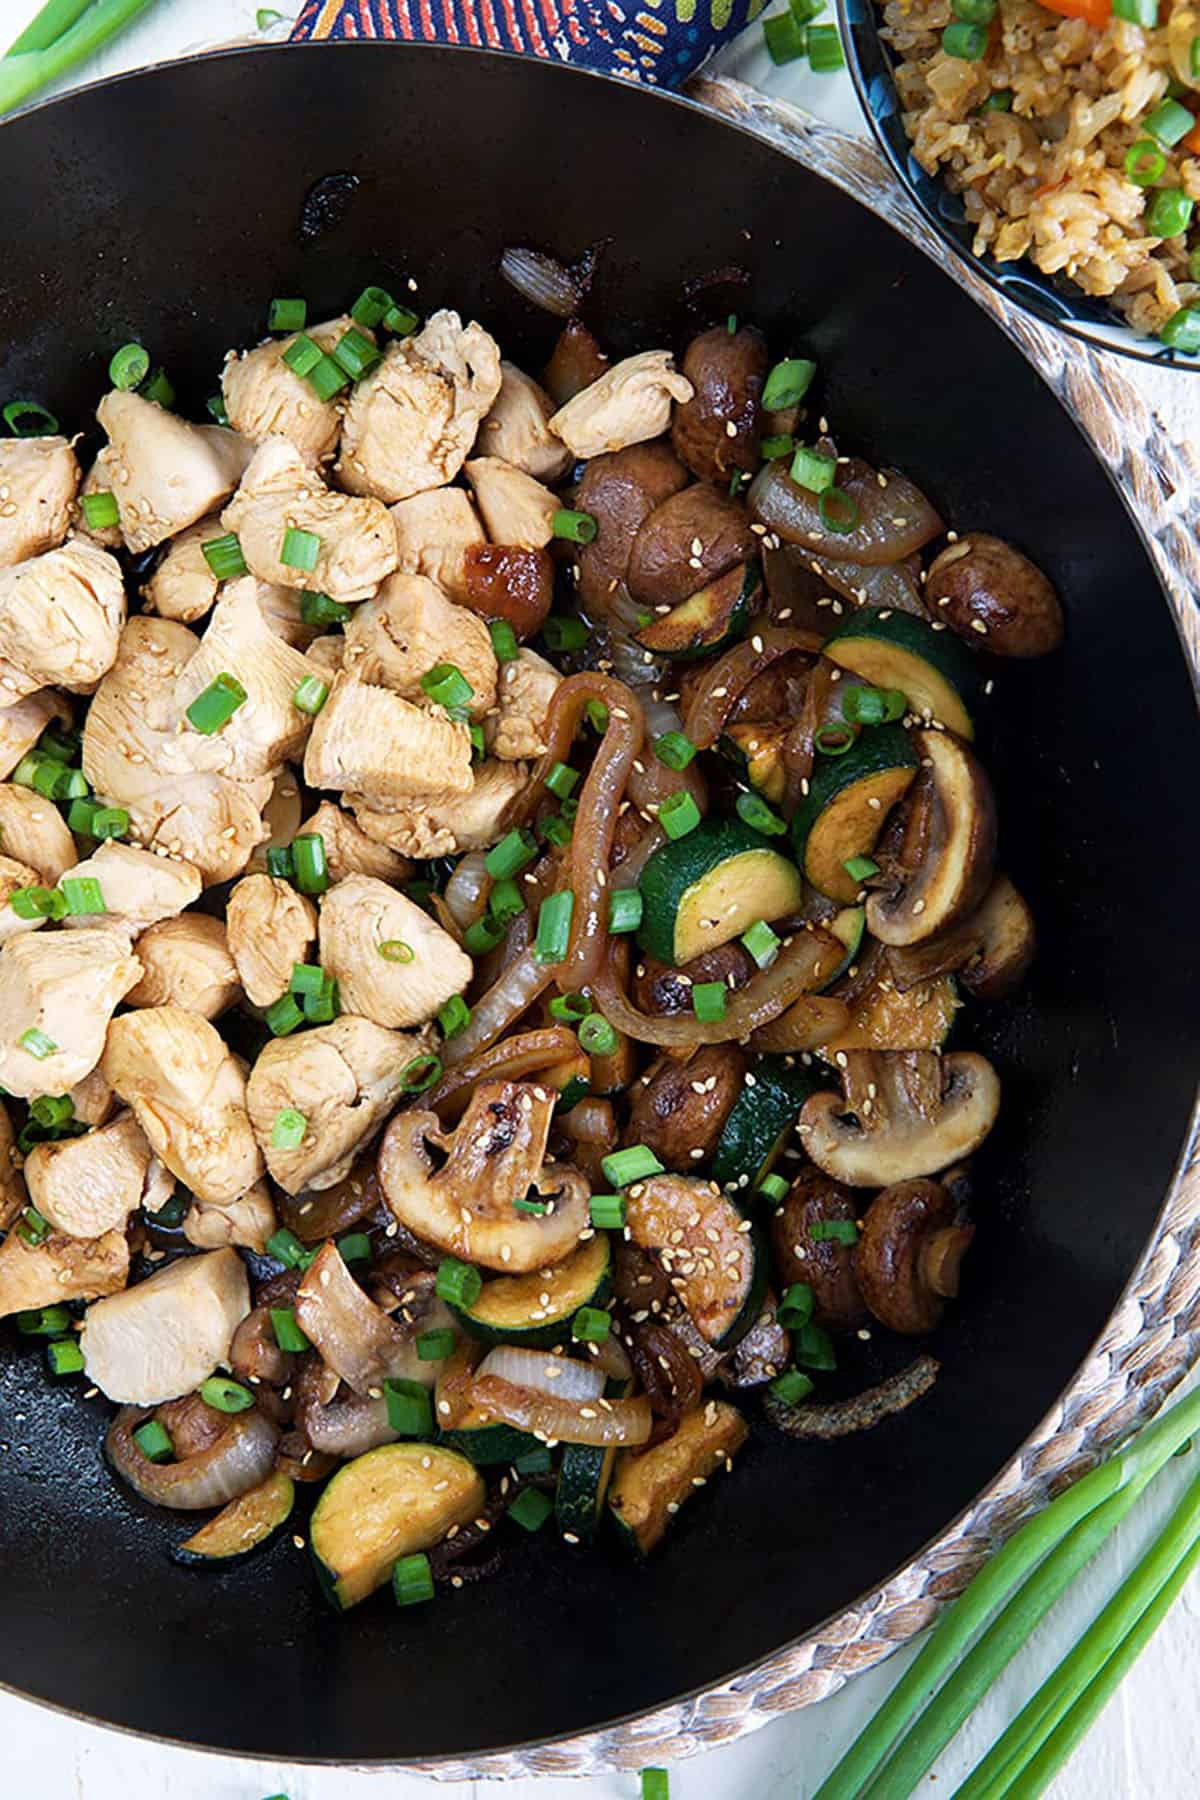 Chicken and veggies are in a large skillet, garnished with chopped green onions.